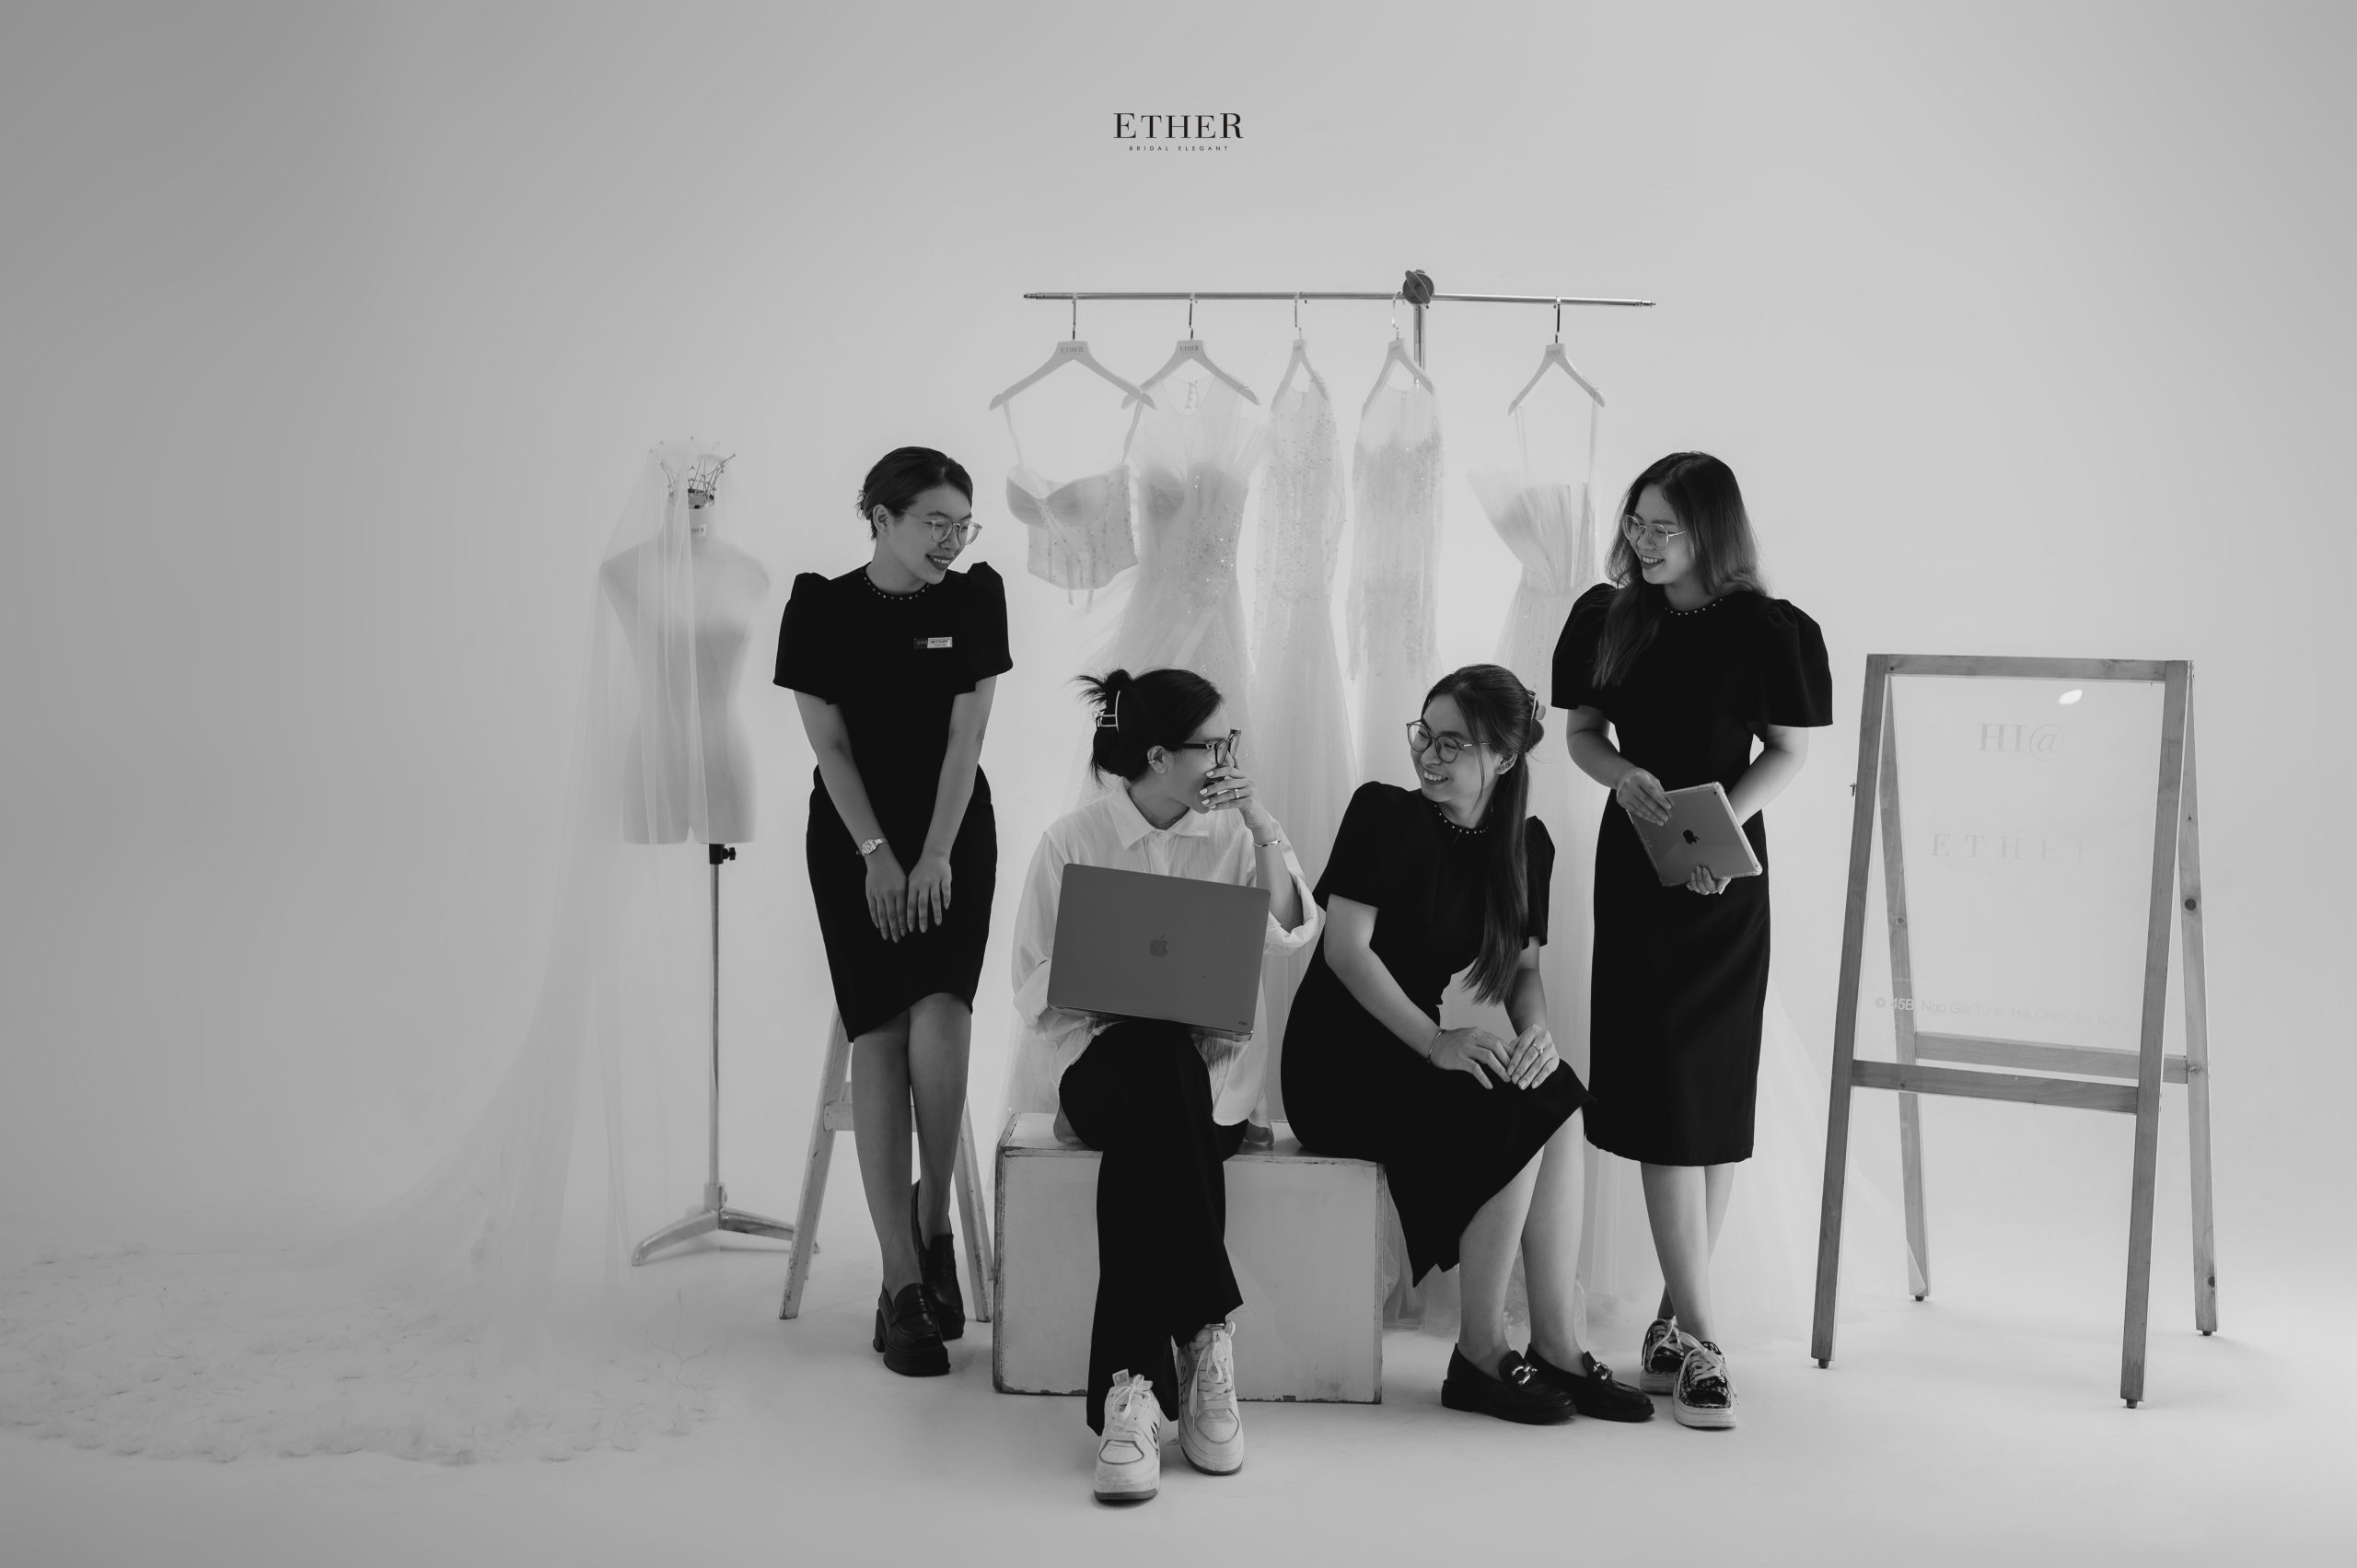 Dedicated and professional Ether Bridal staff, customer support